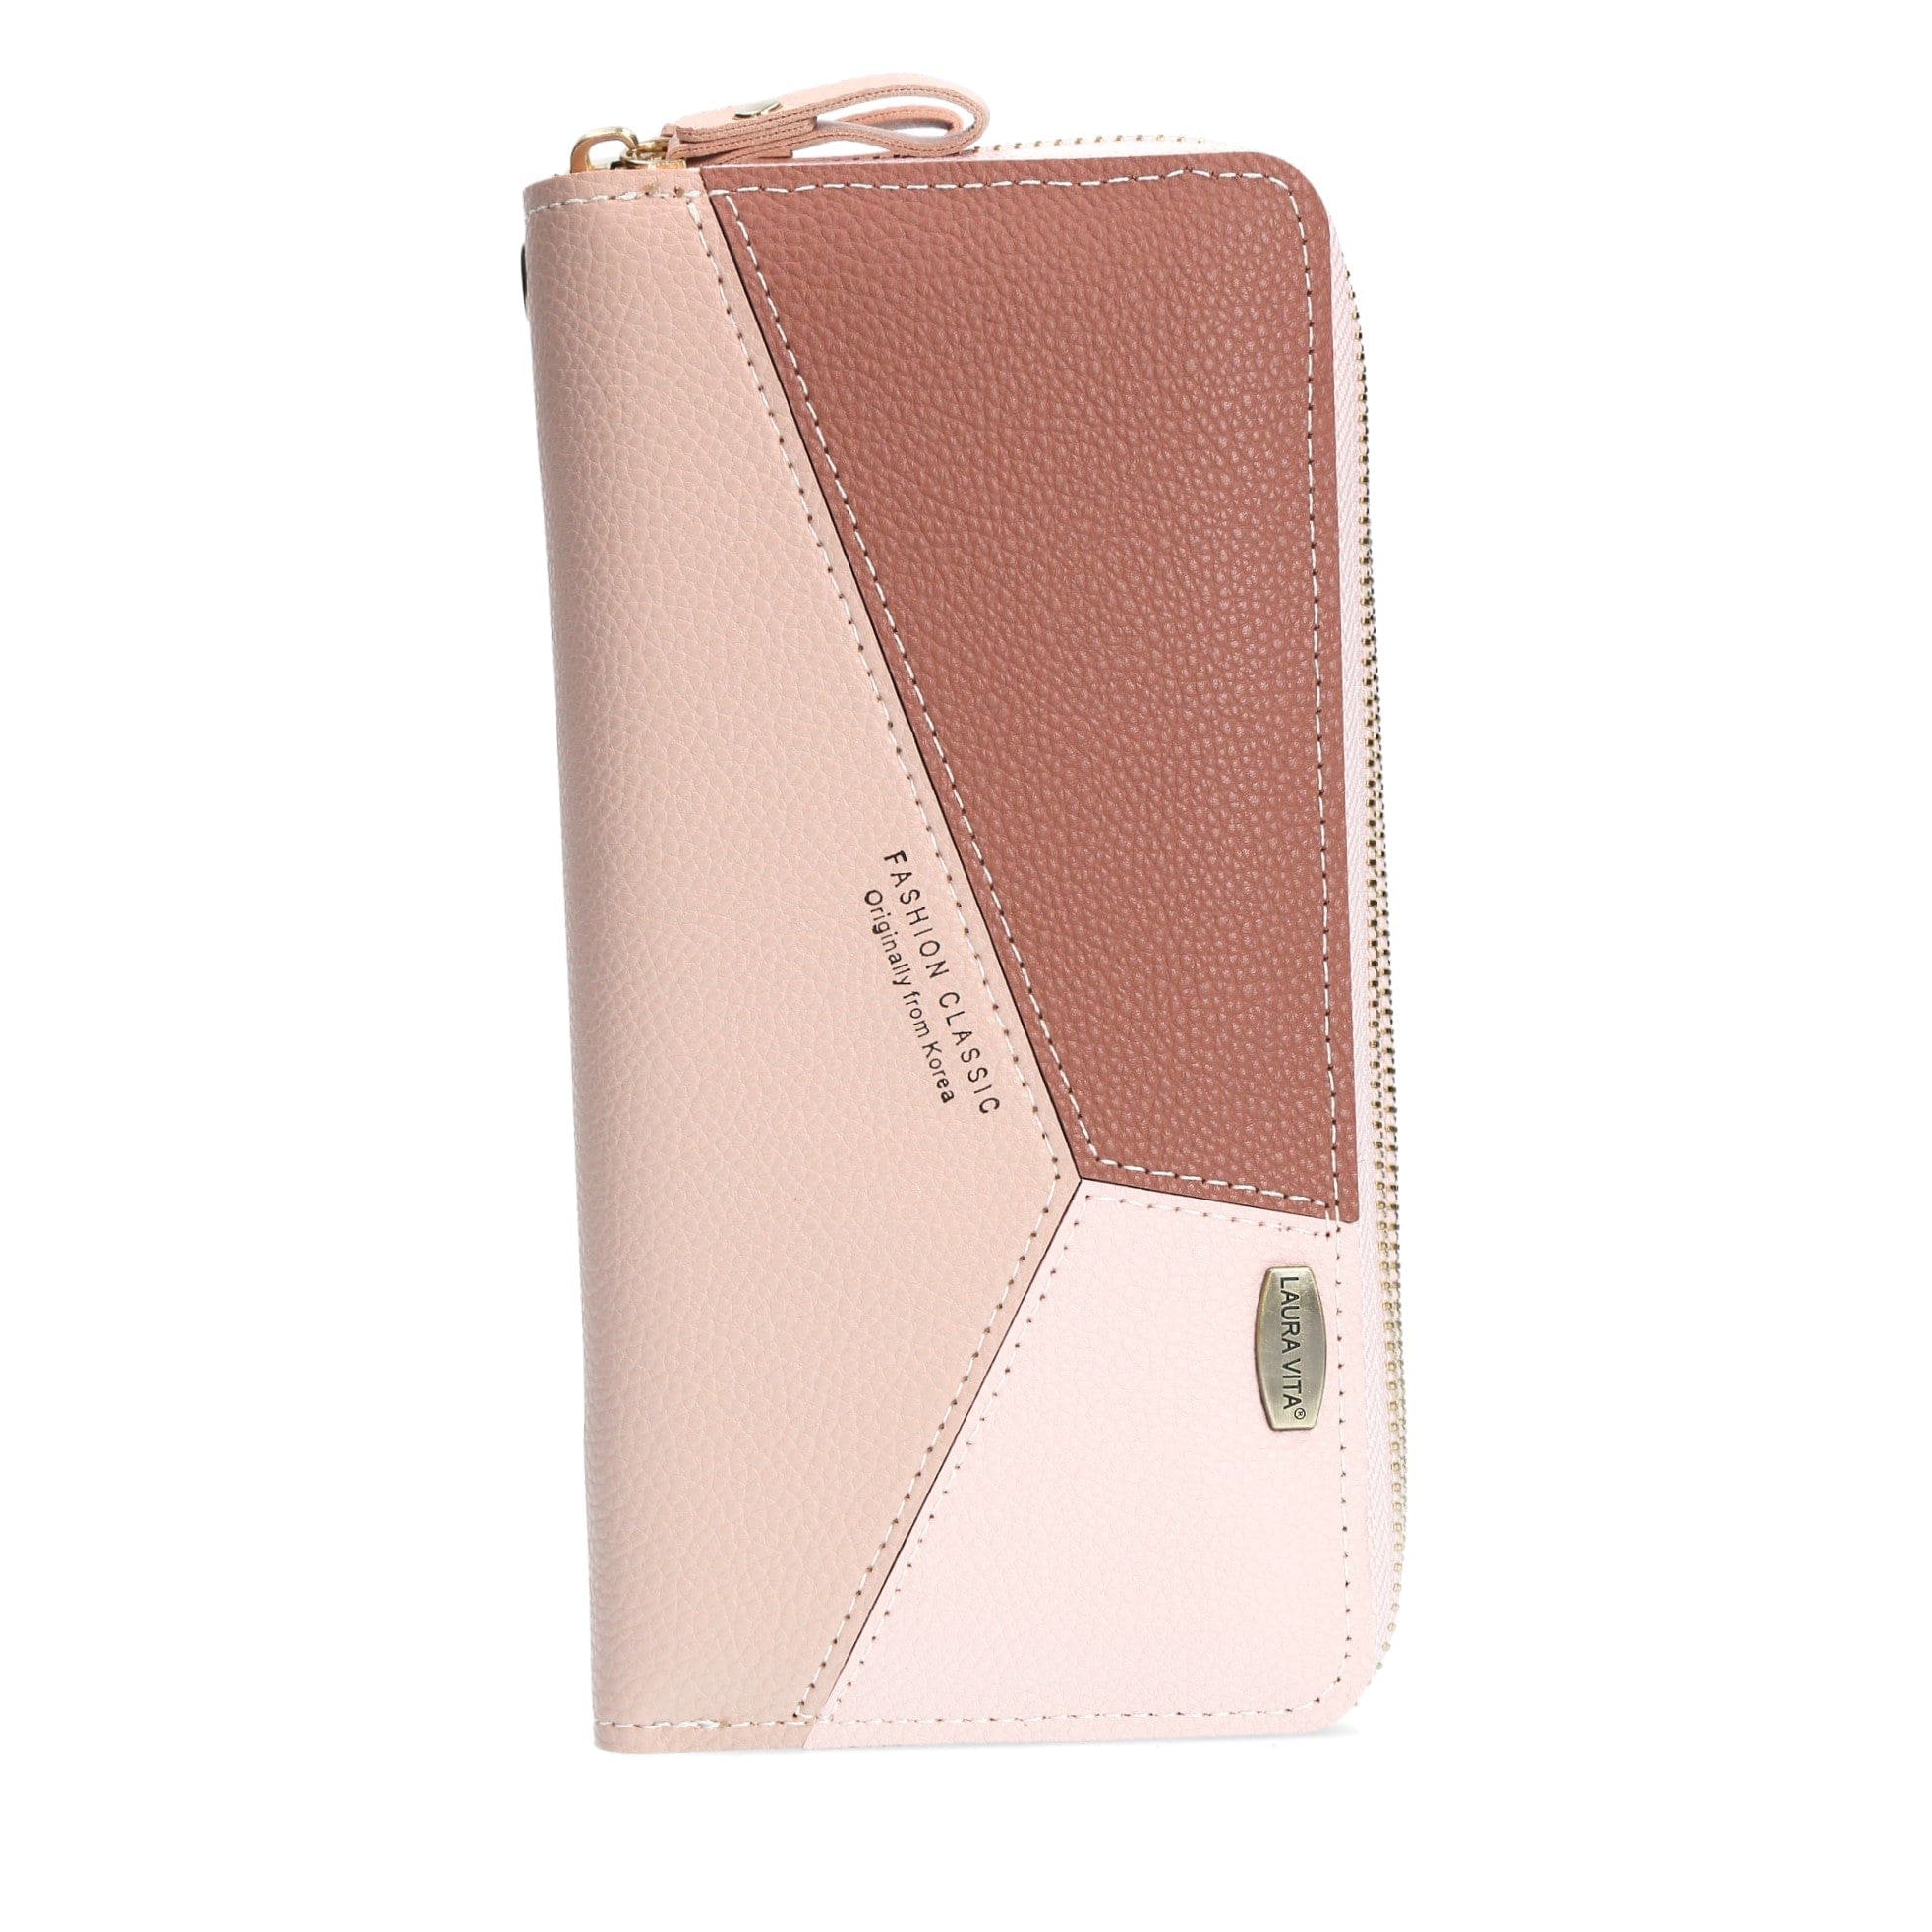 Safir wallet - Pink - Small leather goods